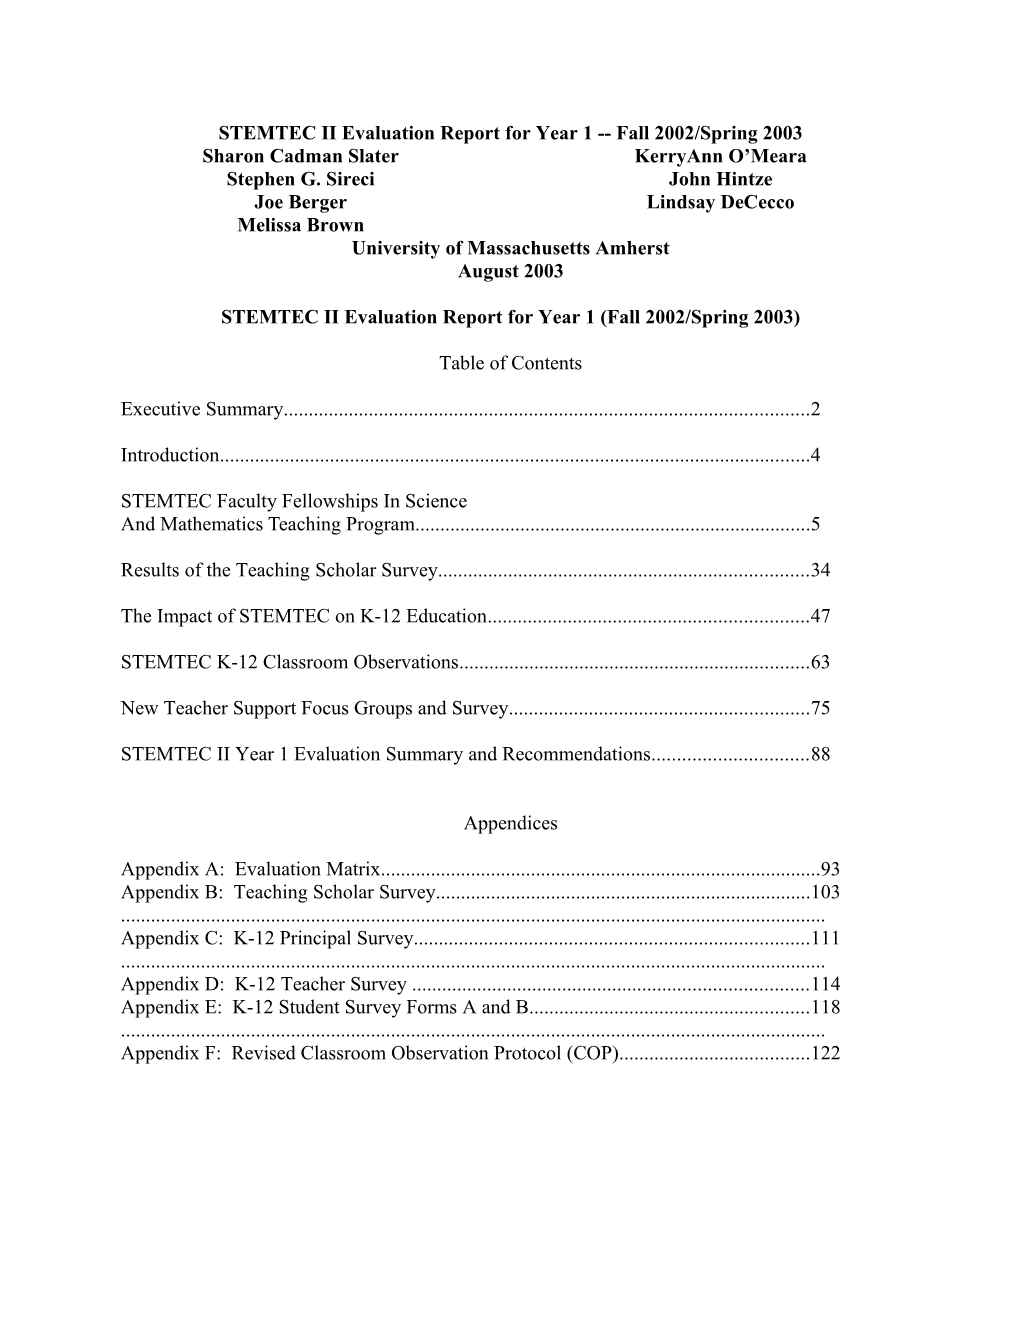 STEMTEC II Evaluation Report for Year 1 Fall 2002/Spring 2003